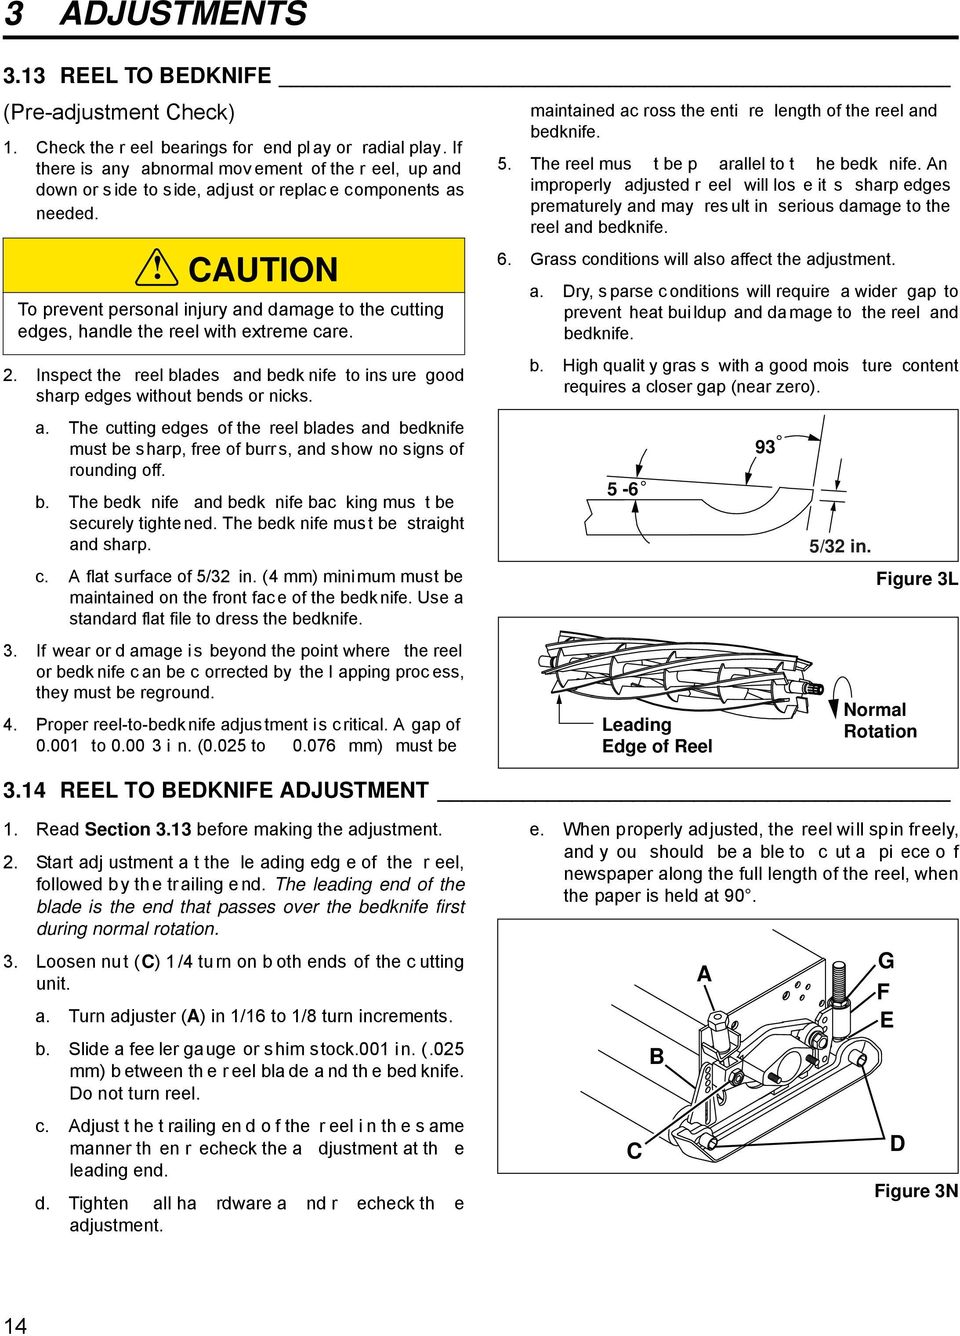 ! CAUTION To prevent personal injury and damage to the cutting edges, handle the reel with extreme care. 2. Inspect the reel blades and bedk nife to ins ure good sharp edges without bends or nicks. a. The cutting edges of the reel blades and bedknife must be sharp, free of burr s, and show no signs of rounding off.